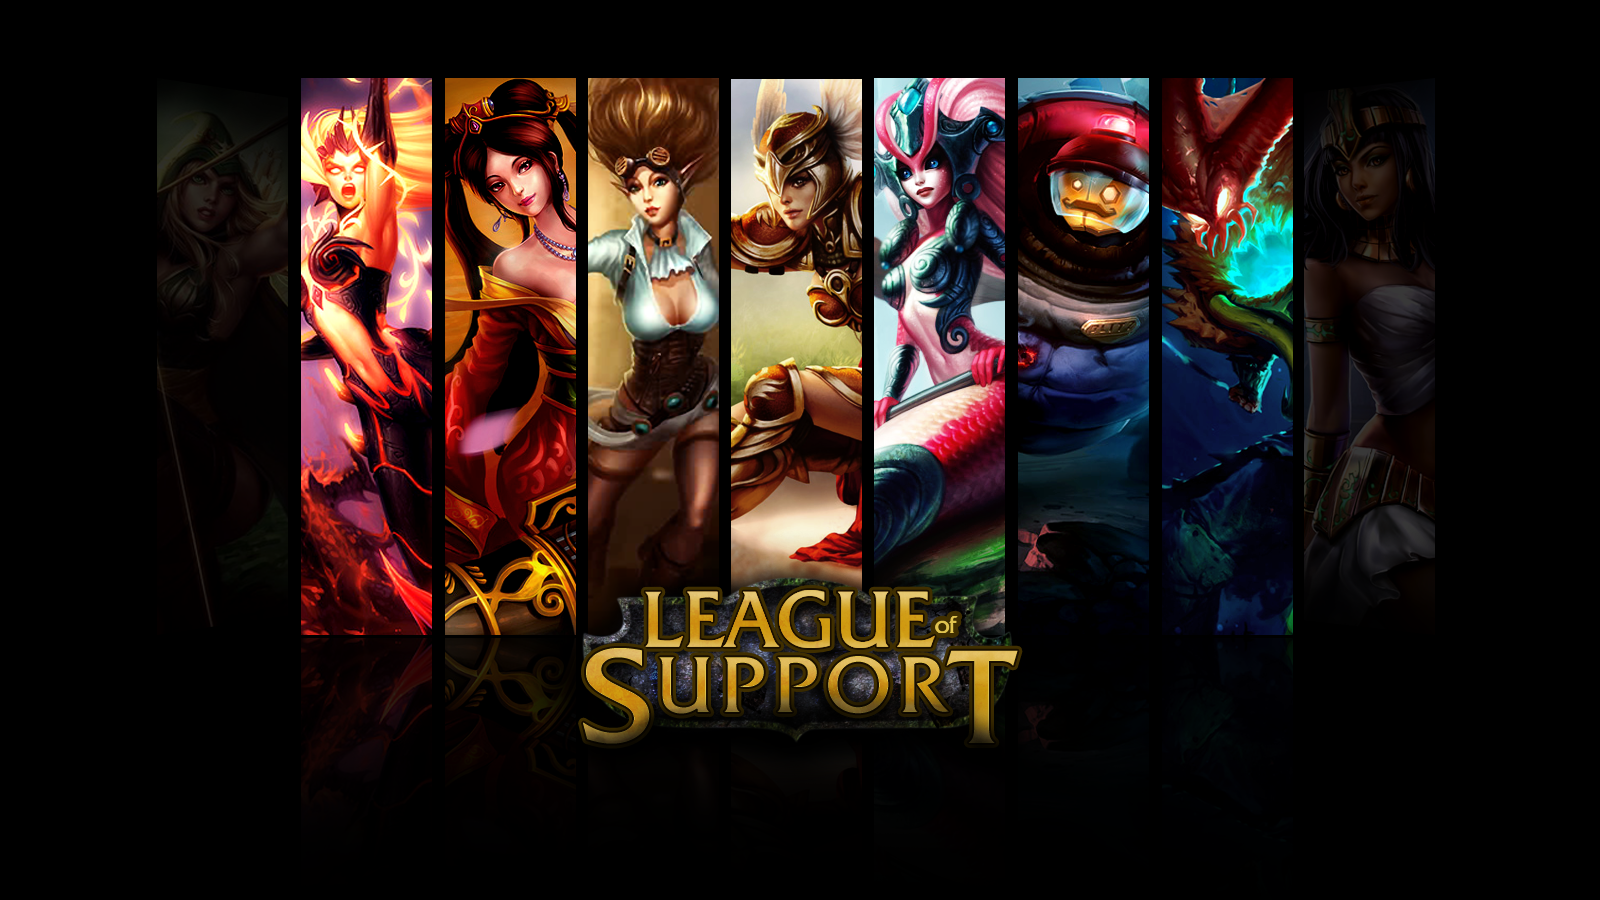 League Of Legends Support Wallpaper League of support wallpaper by